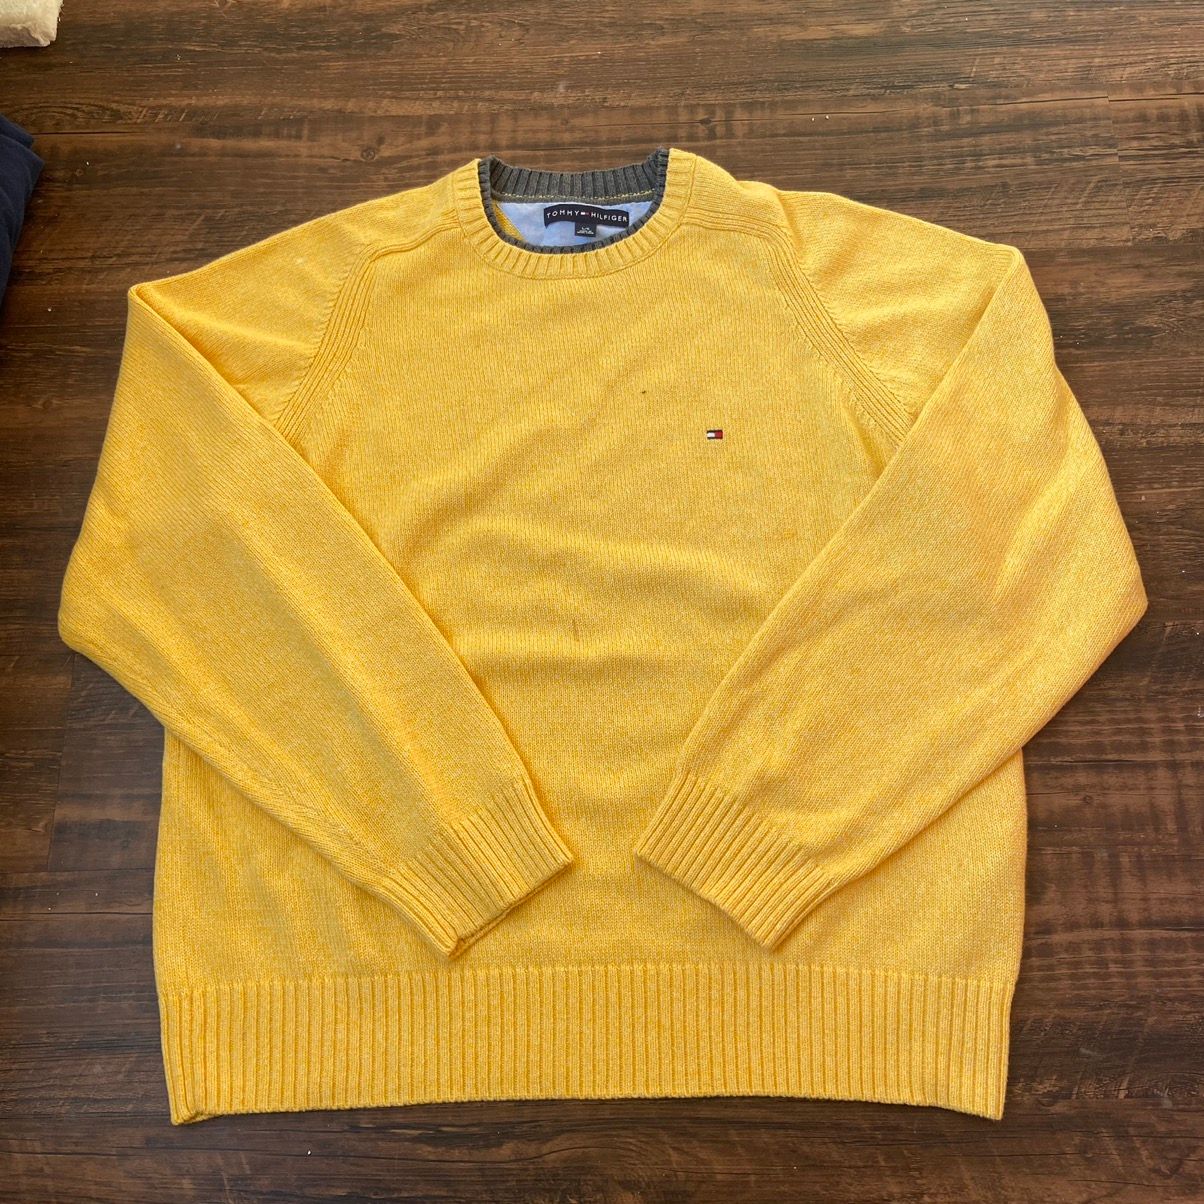 Vintage Vintage yellow Tommy Hilfiger fisherman sweater | Grailed